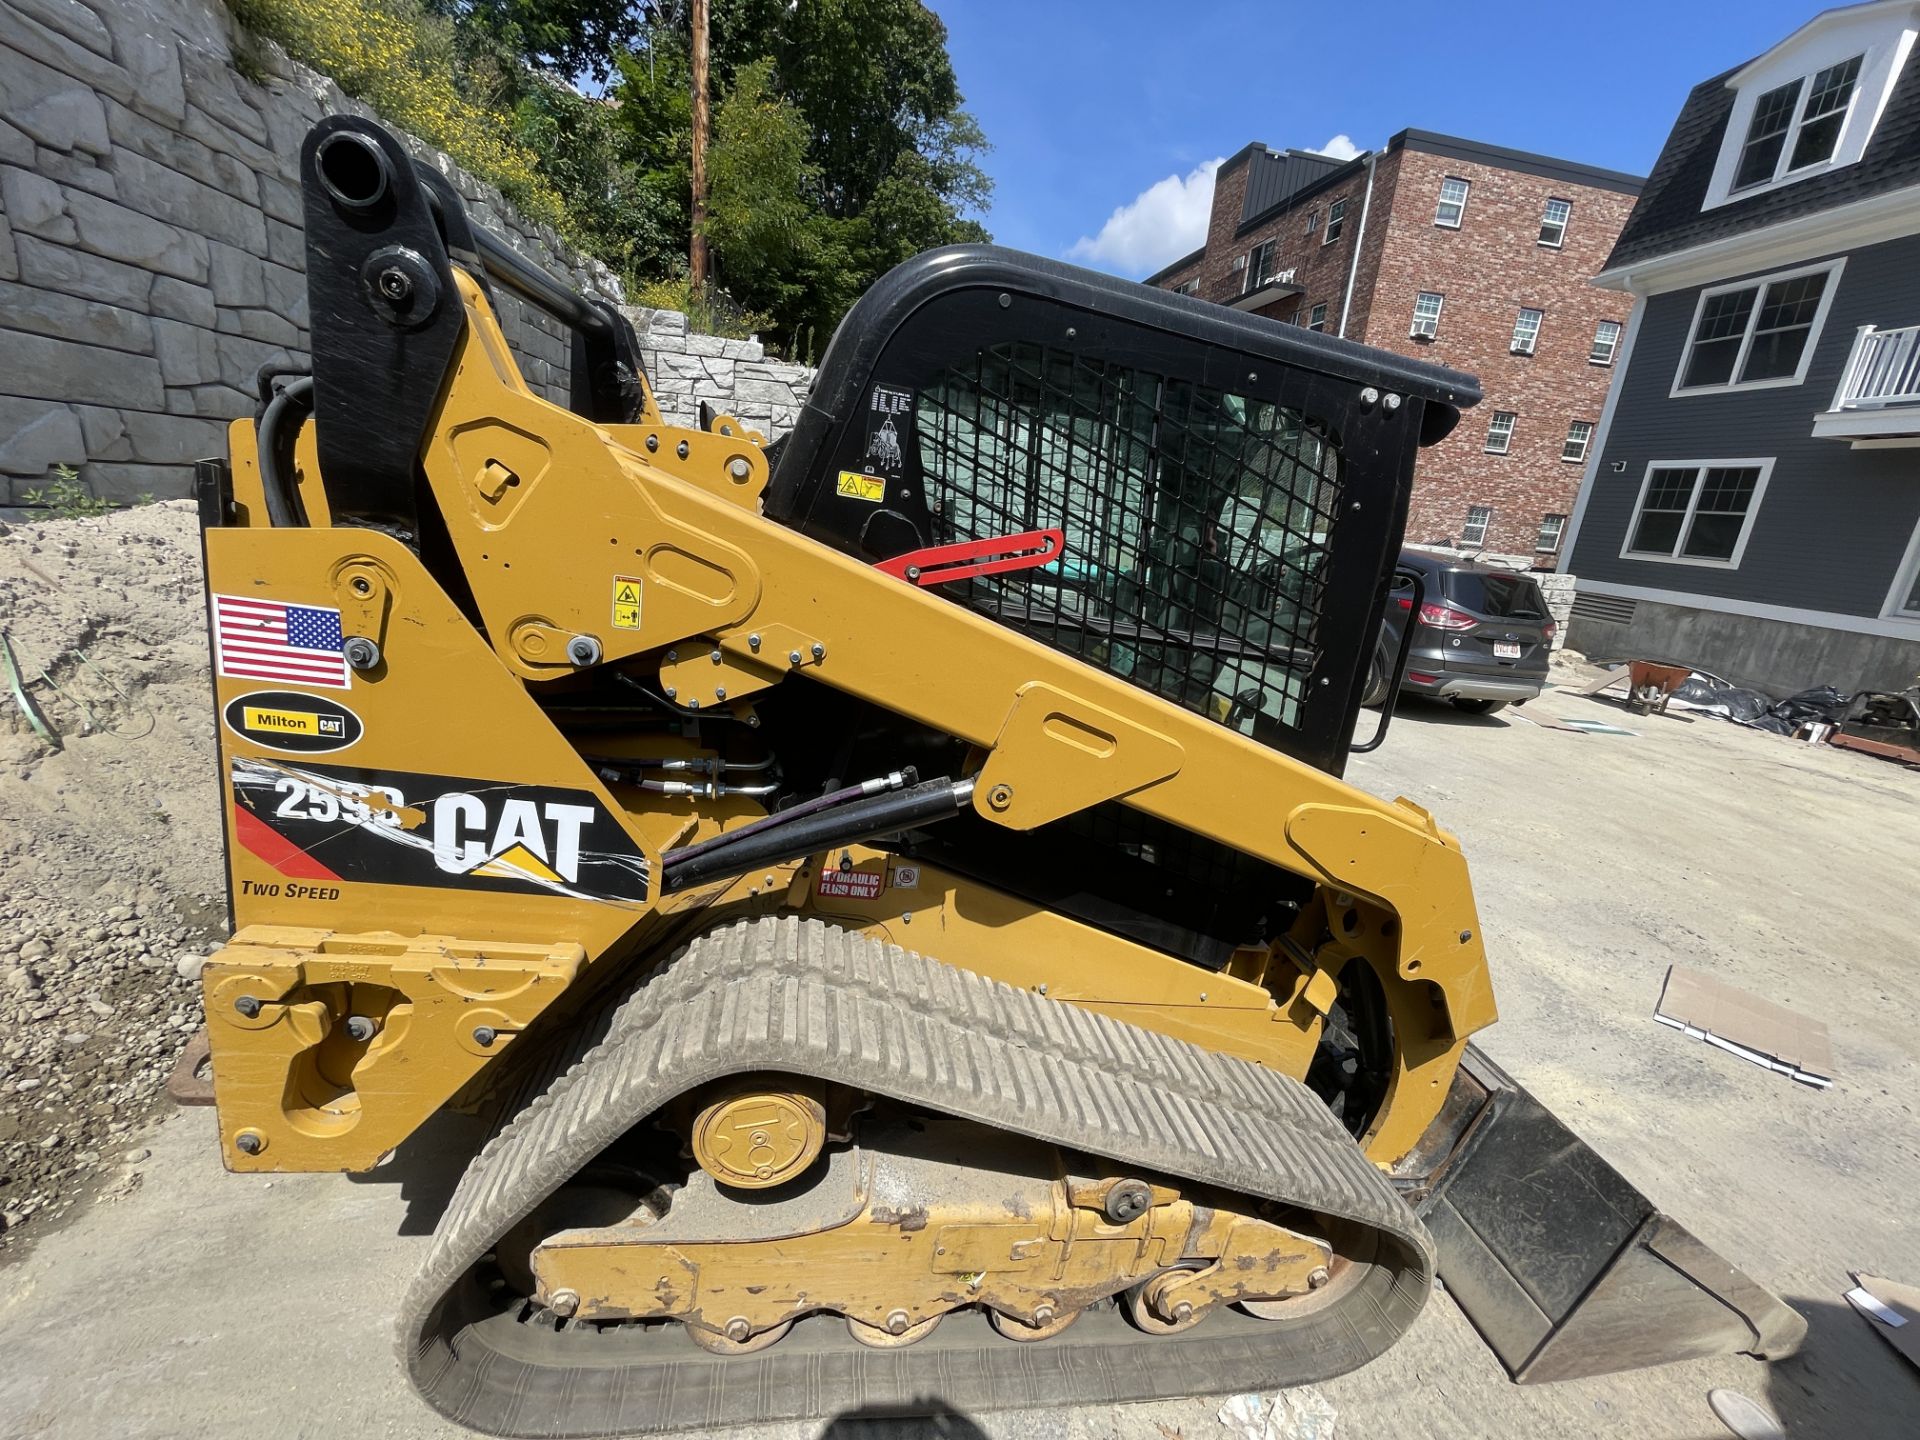 2016 Cat 259D Skid Steer Hours 932.2, Two Speed, Backup Cam, A/C & Heat, W/ 6' Cat Bucket - Image 2 of 11